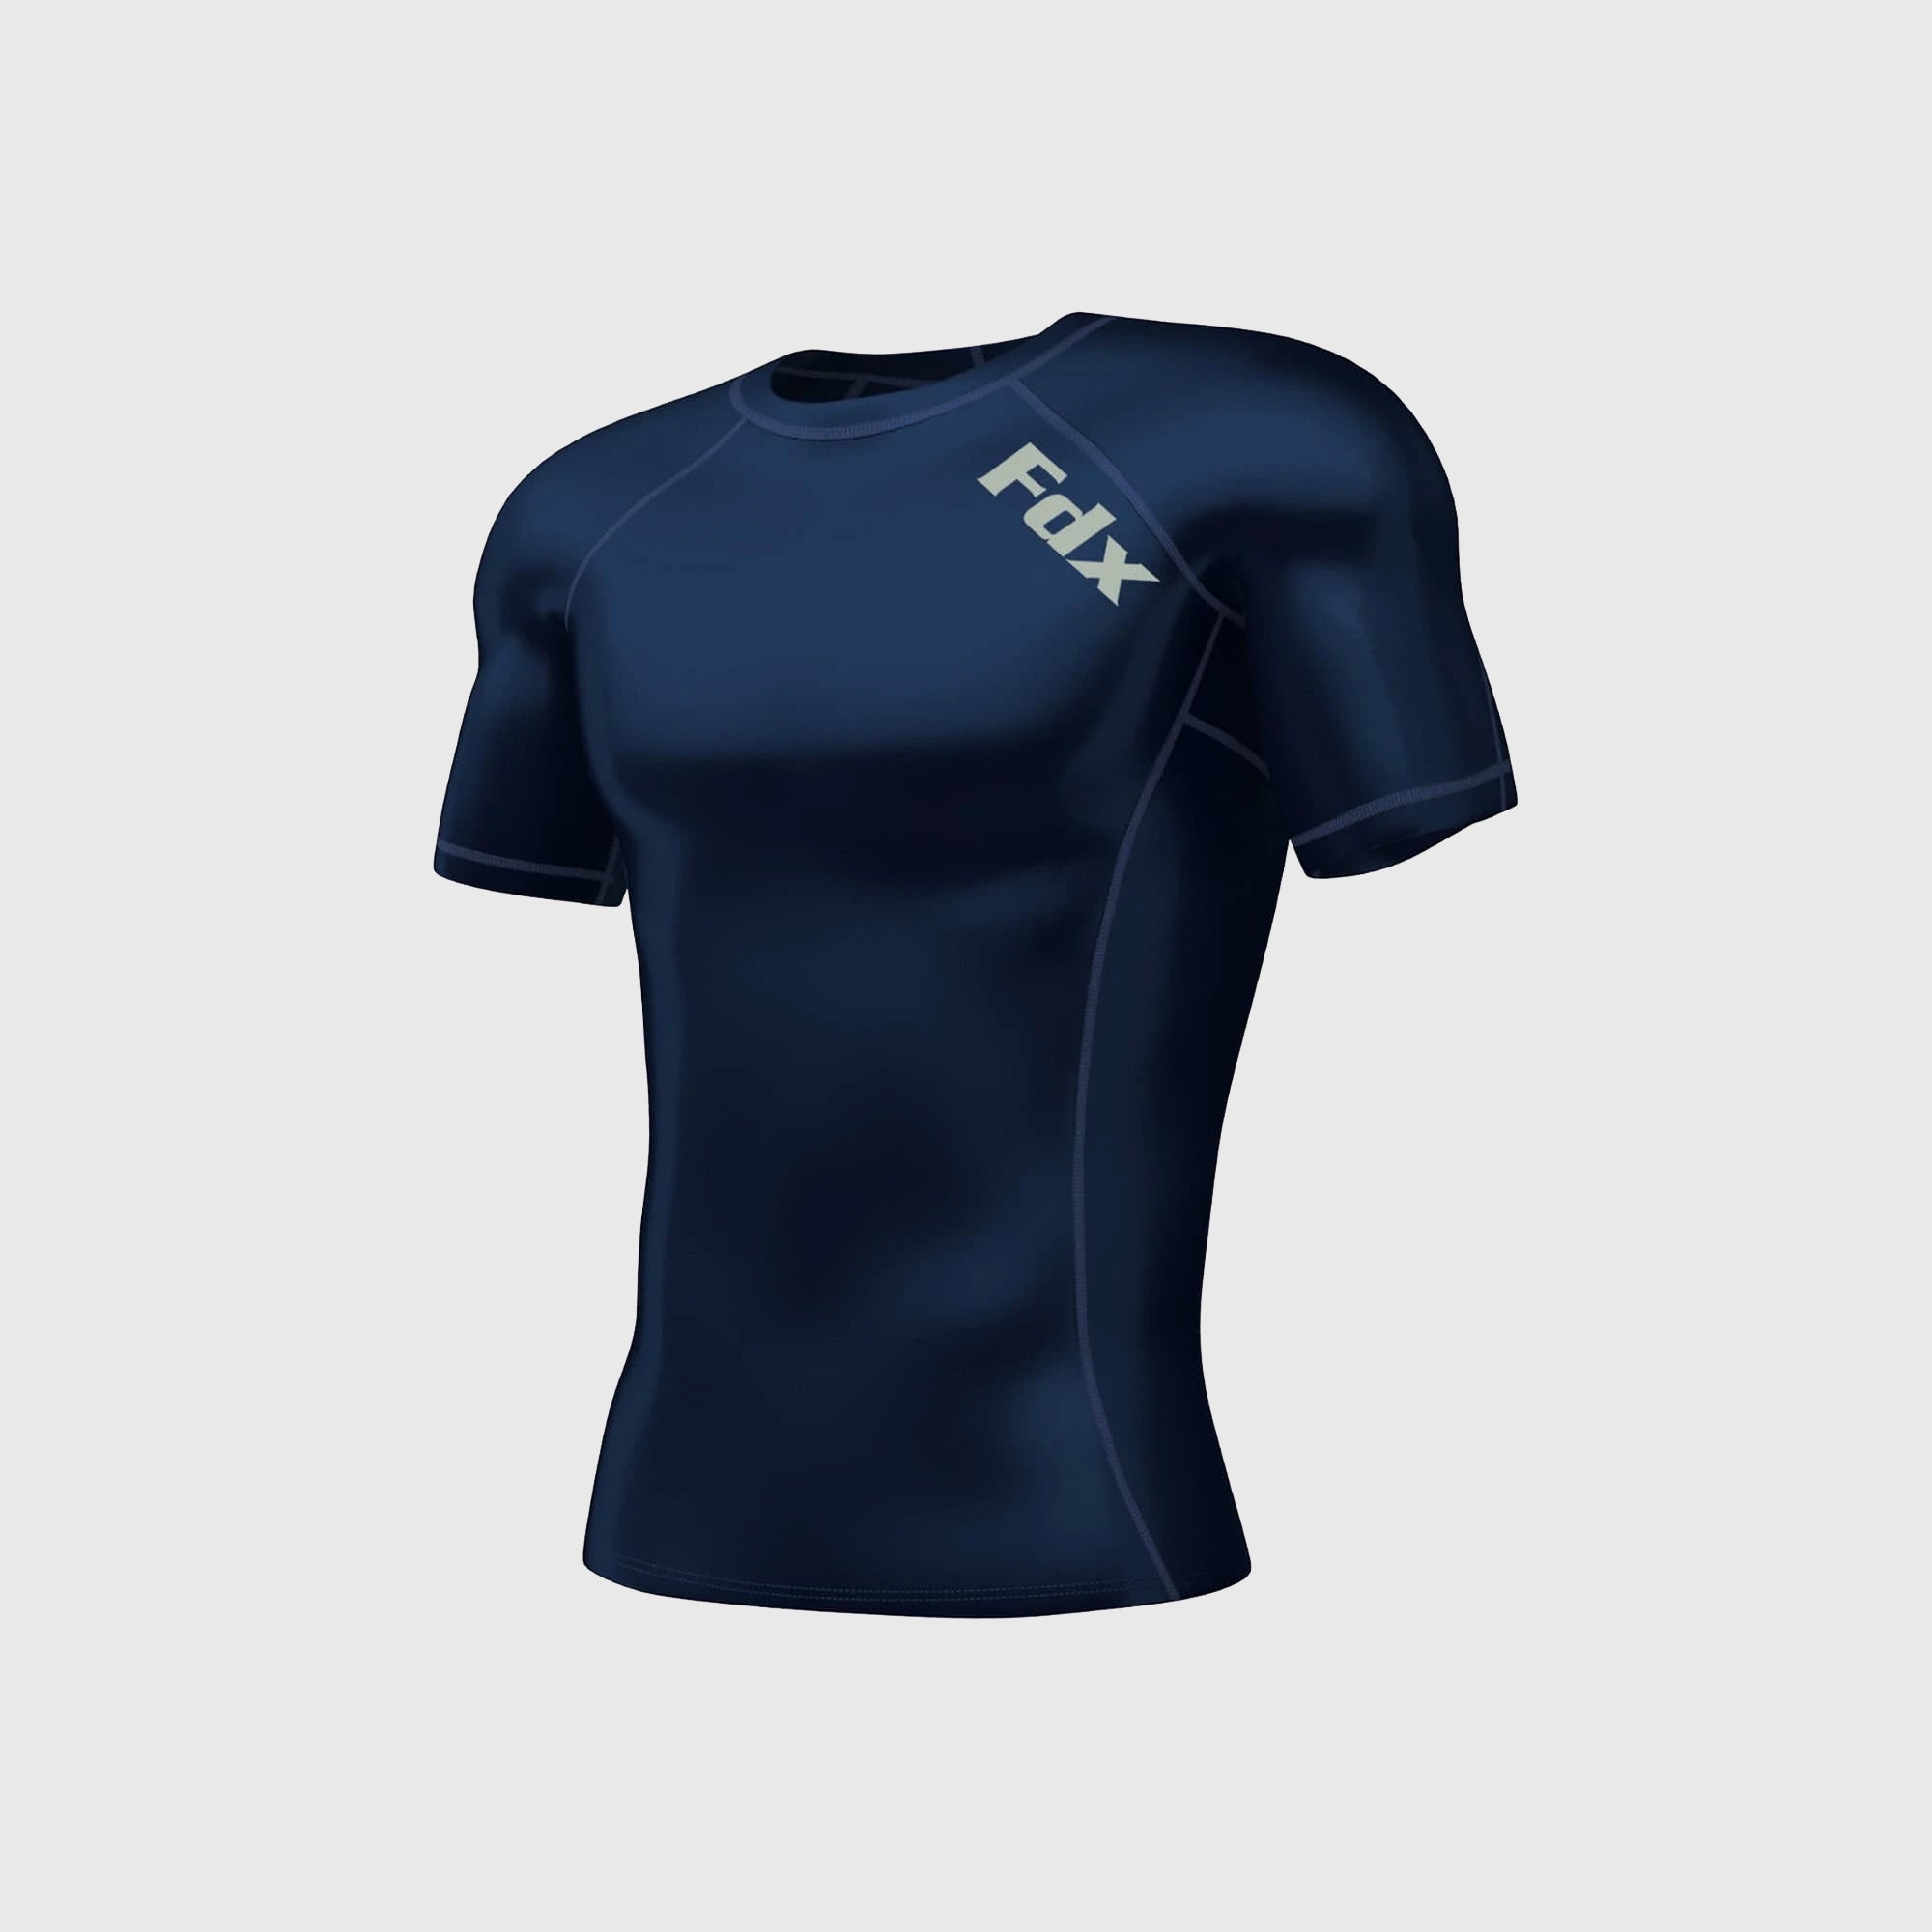 Fdx Mens Navy Blue Short Sleeve Compression Top Running Gym Workout Wear Rash Guard Stretchable Breathable Baselayer Shirt - Cosmic